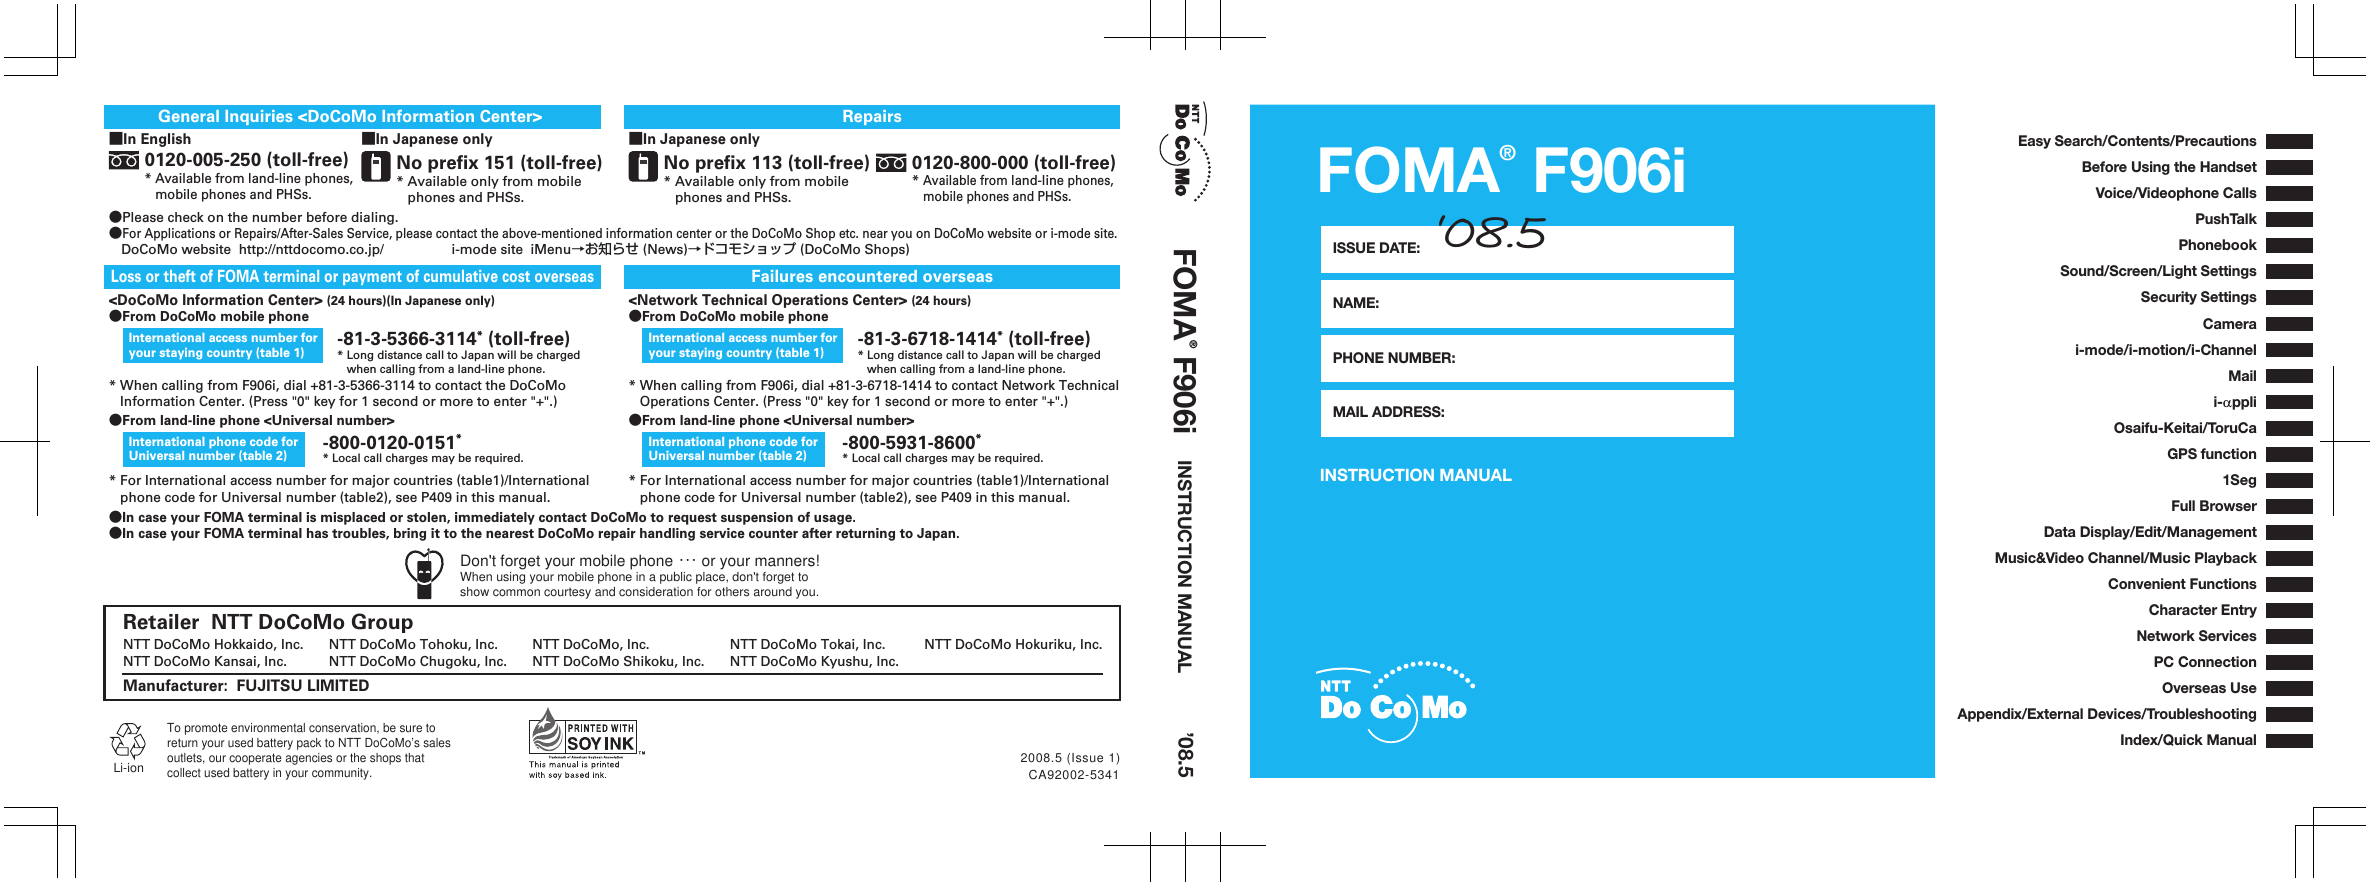 INSTRUCTION MANUALFOMA® F906iISSUE DATE:NAME:PHONE NUMBER:MAIL ADDRESS:‘08.5CA92002-53412008.5 (Issue 1)●In case your FOMA terminal is misplaced or stolen, immediately contact DoCoMo to request suspension of usage.●In case your FOMA terminal has troubles, bring it to the nearest DoCoMo repair handling service counter after returning to Japan.■In Japanese onlyRepairs0120-800-000 (toll-free)* Available from land-line phones,     mobile phones and PHSs.No prefix 113 (toll-free)* Available only from mobile    phones and PHSs.■In English ■In Japanese onlyGeneral Inquiries &lt;DoCoMo Information Center&gt; ●Please check on the number before dialing.●For Applications or Repairs/After-Sales Service, please contact the above-mentioned information center or the DoCoMo Shop etc. near you on DoCoMo website or i-mode site.DoCoMo website  http://nttdocomo.co.jp/     i-mode site  iMenu→お知らせ (News)→ドコモショップ (DoCoMo Shops)No prefix 151 (toll-free)* Available only from mobile    phones and PHSs.0120-005-250 (toll-free)* Available from land-line phones,     mobile phones and PHSs.* When calling from F906i, dial +81-3-5366-3114 to contact the DoCoMo    Information Center. (Press &quot;0&quot; key for 1 second or more to enter &quot;+&quot;.)Failures encountered overseasLoss or theft of FOMA terminal or payment of cumulative cost overseas&lt;DoCoMo Information Center&gt; (24 hours)(In Japanese only)●From DoCoMo mobile phoneInternational access number for your staying country (table 1)* When calling from F906i, dial +81-3-6718-1414 to contact Network Technical    Operations Center. (Press &quot;0&quot; key for 1 second or more to enter &quot;+&quot;.)&lt;Network Technical Operations Center&gt; (24 hours)●From DoCoMo mobile phoneInternational access number for your staying country (table 1)●From land-line phone &lt;Universal number&gt;* For International access number for major countries (table1)/International    phone code for Universal number (table2), see P409 in this manual.International phone code for Universal number (table 2)●From land-line phone &lt;Universal number&gt;* For International access number for major countries (table1)/International    phone code for Universal number (table2), see P409 in this manual.International phone code for Universal number (table 2)-81-3-5366-3114* (toll-free)* Long distance call to Japan will be charged    when calling from a land-line phone.-81-3-6718-1414* (toll-free)* Long distance call to Japan will be charged    when calling from a land-line phone.-800-0120-0151** Local call charges may be required.-800-5931-8600** Local call charges may be required.Li-ionTo promote environmental conservation, be sure toreturn your used battery pack to NTT DoCoMo’s salesoutlets, our cooperate agencies or the shops thatcollect used battery in your community.Manufacturer:  FUJITSU LIMITEDNTT DoCoMo, Inc. NTT DoCoMo Tokai, Inc. NTT DoCoMo Hokuriku, Inc.NTT DoCoMo Hokkaido, Inc. NTT DoCoMo Tohoku, Inc.NTT DoCoMo Shikoku, Inc. NTT DoCoMo Kyushu, Inc.NTT DoCoMo Kansai, Inc. NTT DoCoMo Chugoku, Inc.Retailer  NTT DoCoMo GroupDon&apos;t forget your mobile phone ･･･ or your manners!When using your mobile phone in a public place, don&apos;t forget to show common courtesy and consideration for others around you.INSTRUCTION MANUALFOMA® F906i ’08.5Easy Search/Contents/PrecautionsBefore Using the HandsetAppendix/External Devices/TroubleshootingConvenient FunctionsNetwork ServicesPC ConnectionCharacter EntryOverseas UseVoice/Videophone CallsPhonebookPushTalkSound/Screen/Light SettingsSecurity SettingsCamerai-mode/i-motion/i-ChannelMaili-αppliData Display/Edit/ManagementMusic&amp;Video Channel/Music PlaybackOsaifu-Keitai/ToruCa1SegFull BrowserGPS functionIndex/Quick Manual